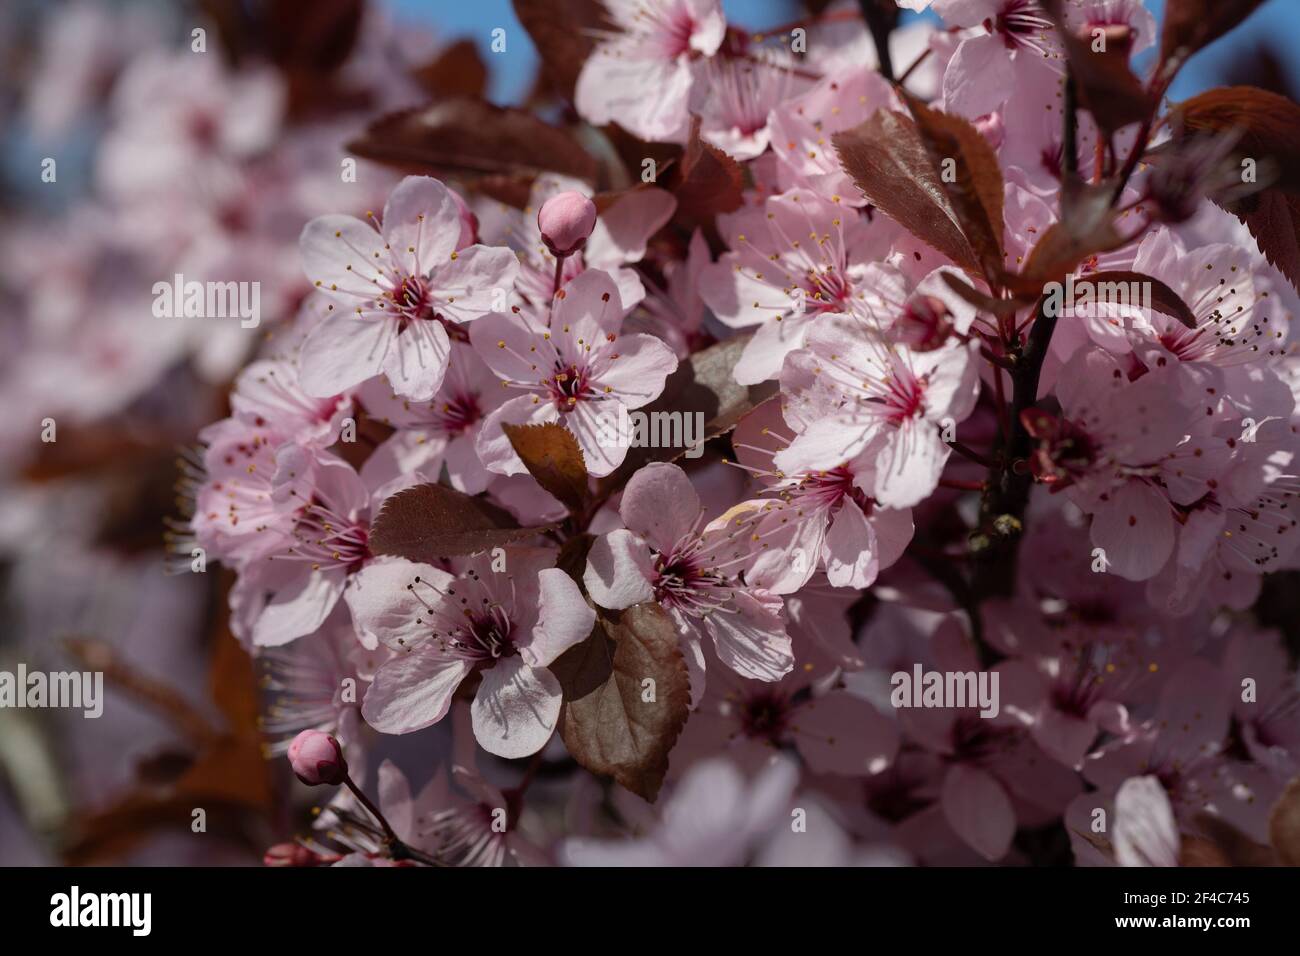 Pink Cherry Plum (Prunus ceracifera 'Nigra') blossom flowering in mid-March in Hertfordshire in the south of England, UK Stock Photo